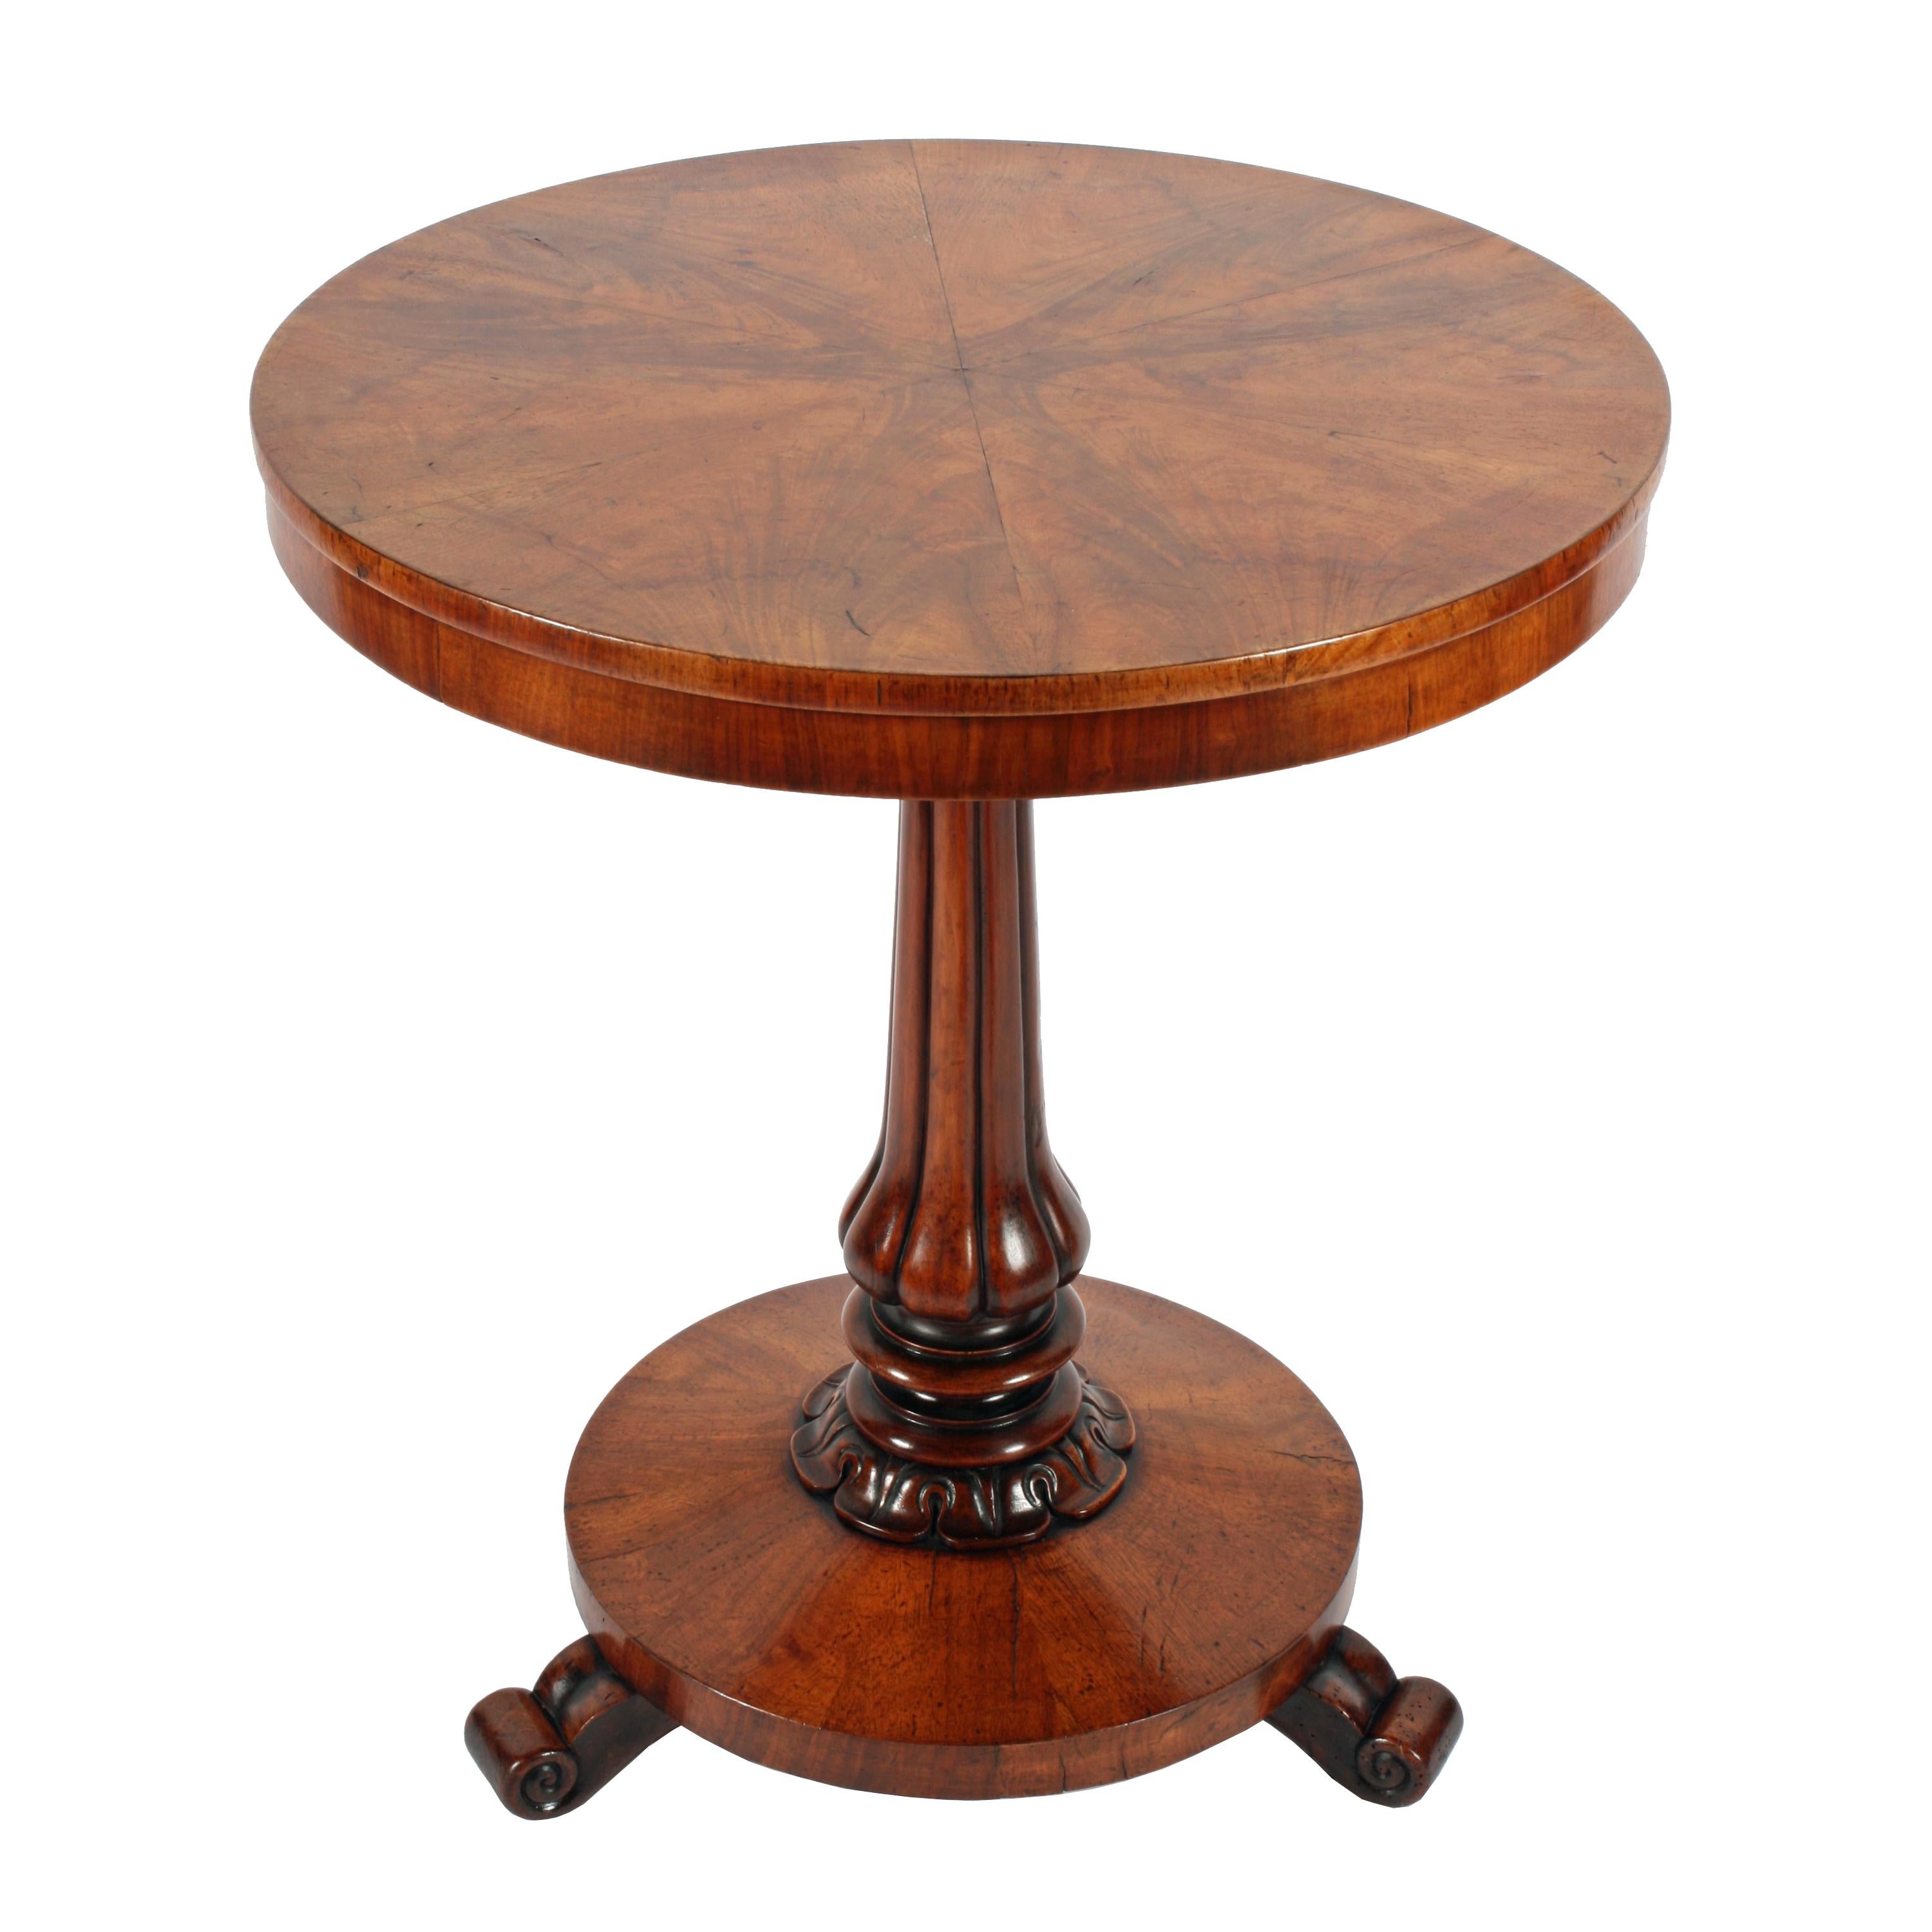 Walnut segmented top lamp table


A mid-19th century walnut platform base lamp table.

The table has a segmented veneer top of six panels and a cross grained veneer to the frieze.

The platform base is raised on three scroll feet and has a